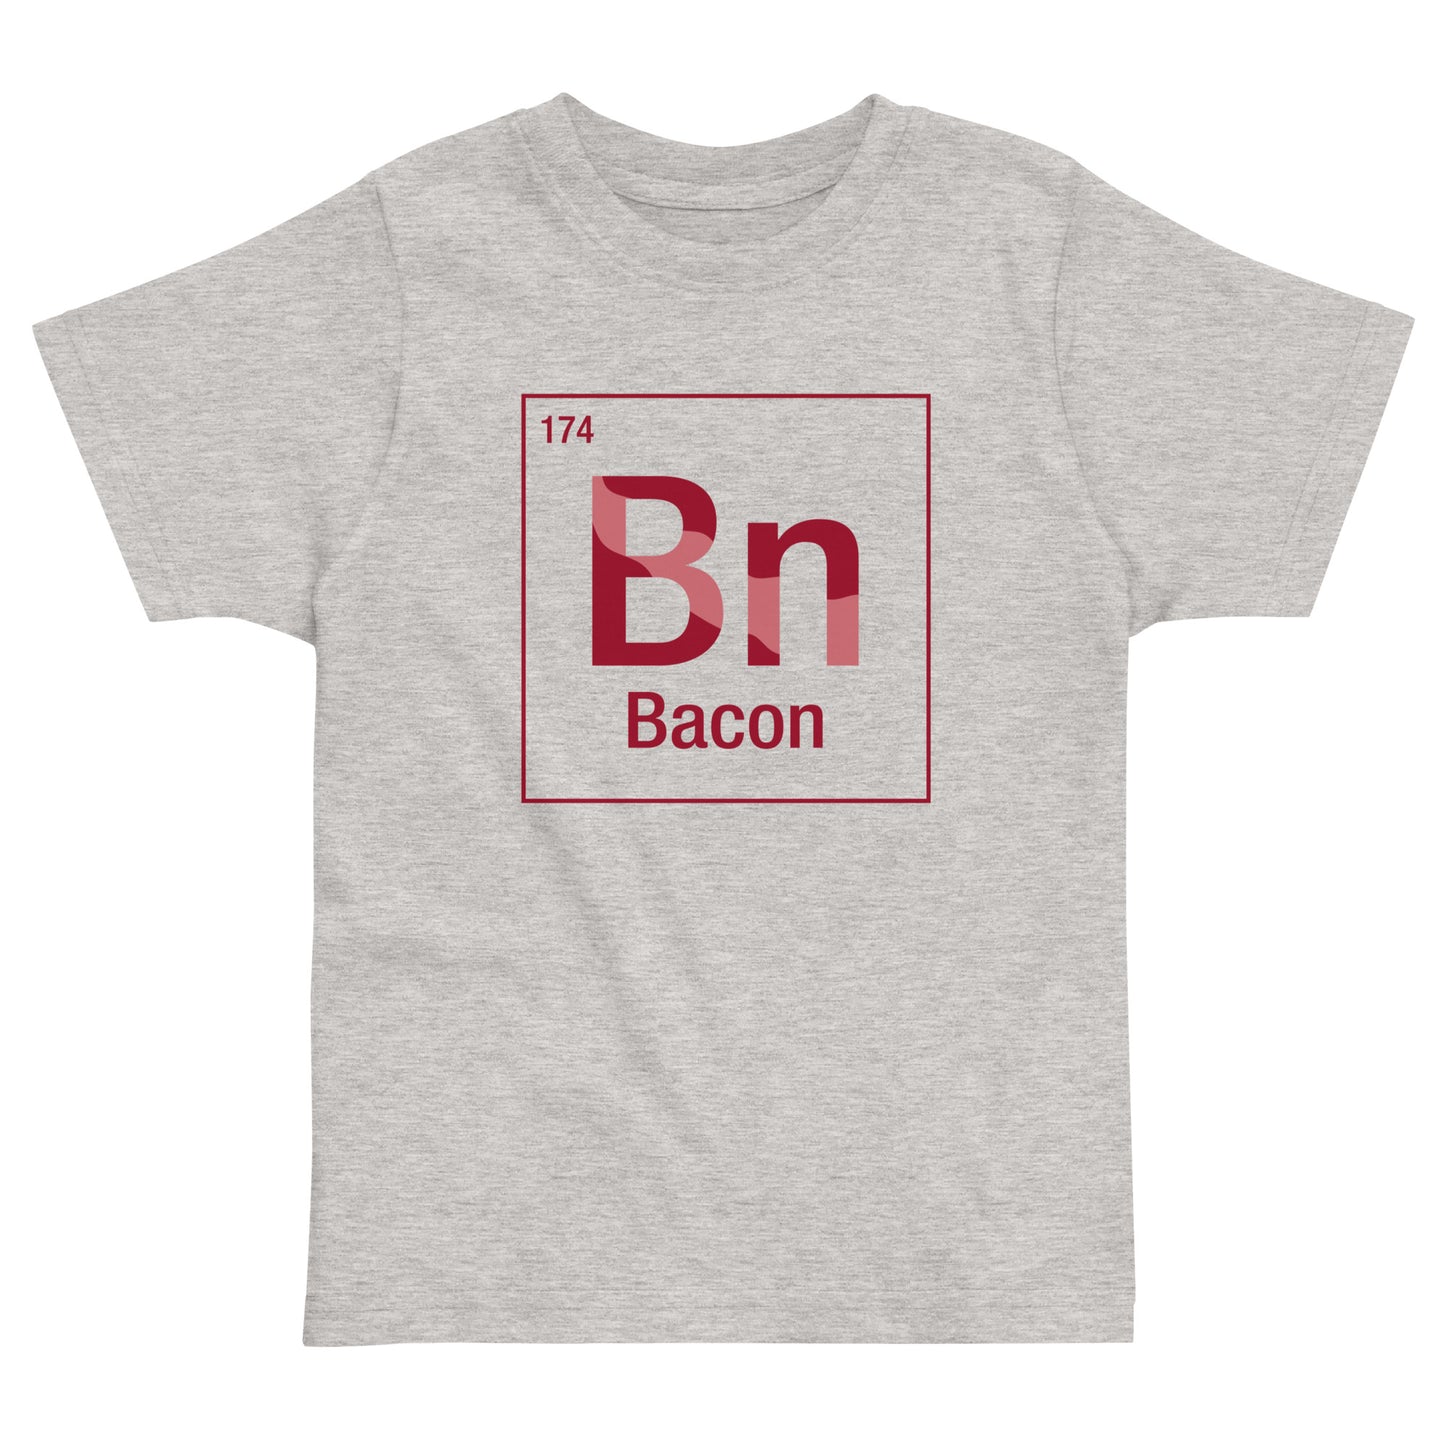 Bacon Element Kid's Toddler Tee